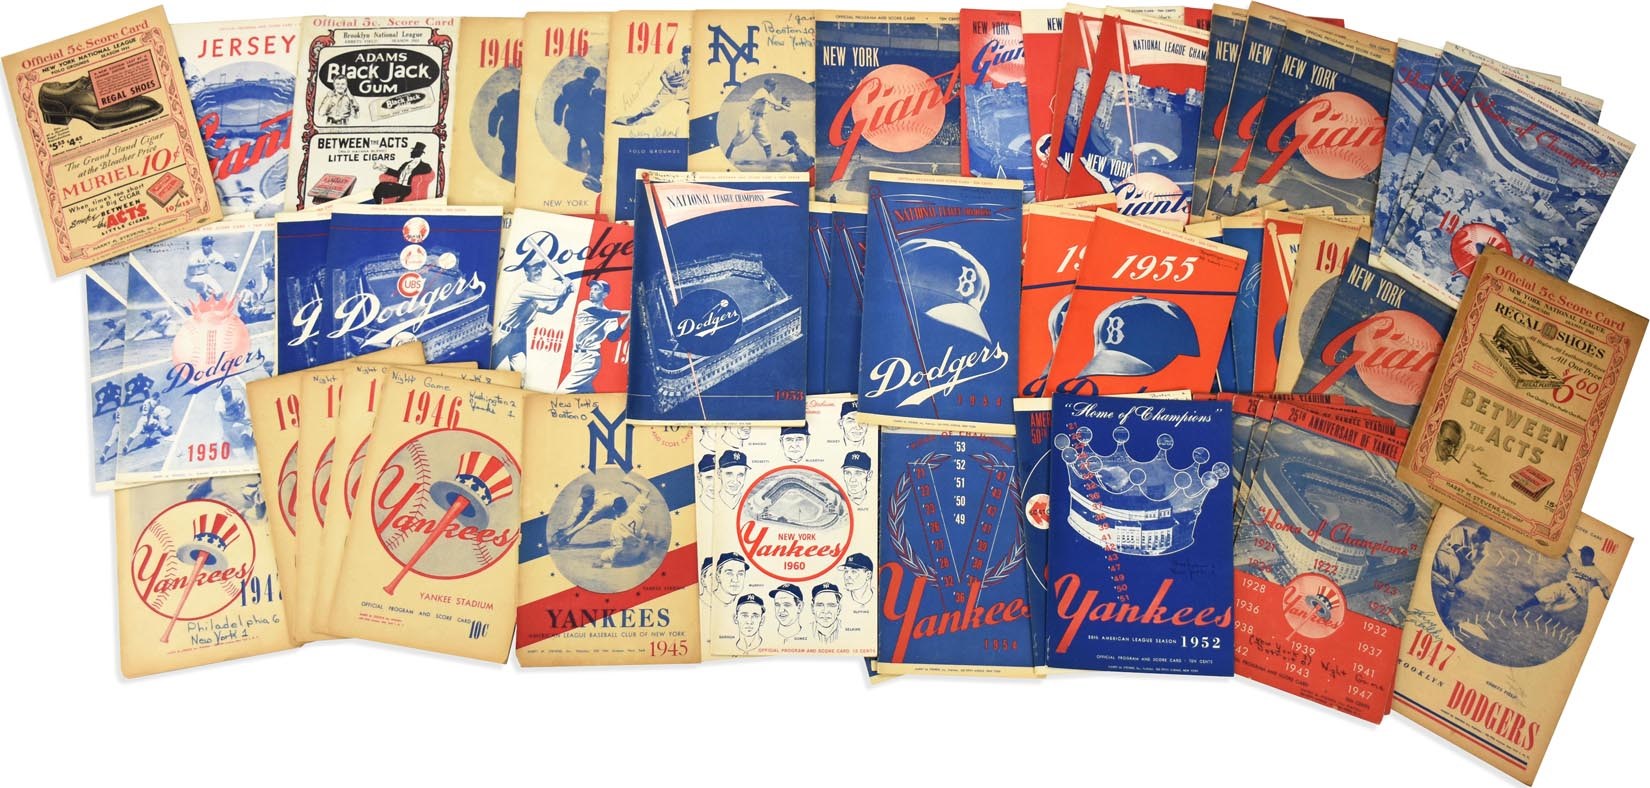 NY Yankees, Giants & Mets - 1920s-50s Yankees, Dodgers & Giants Program Collection (75)